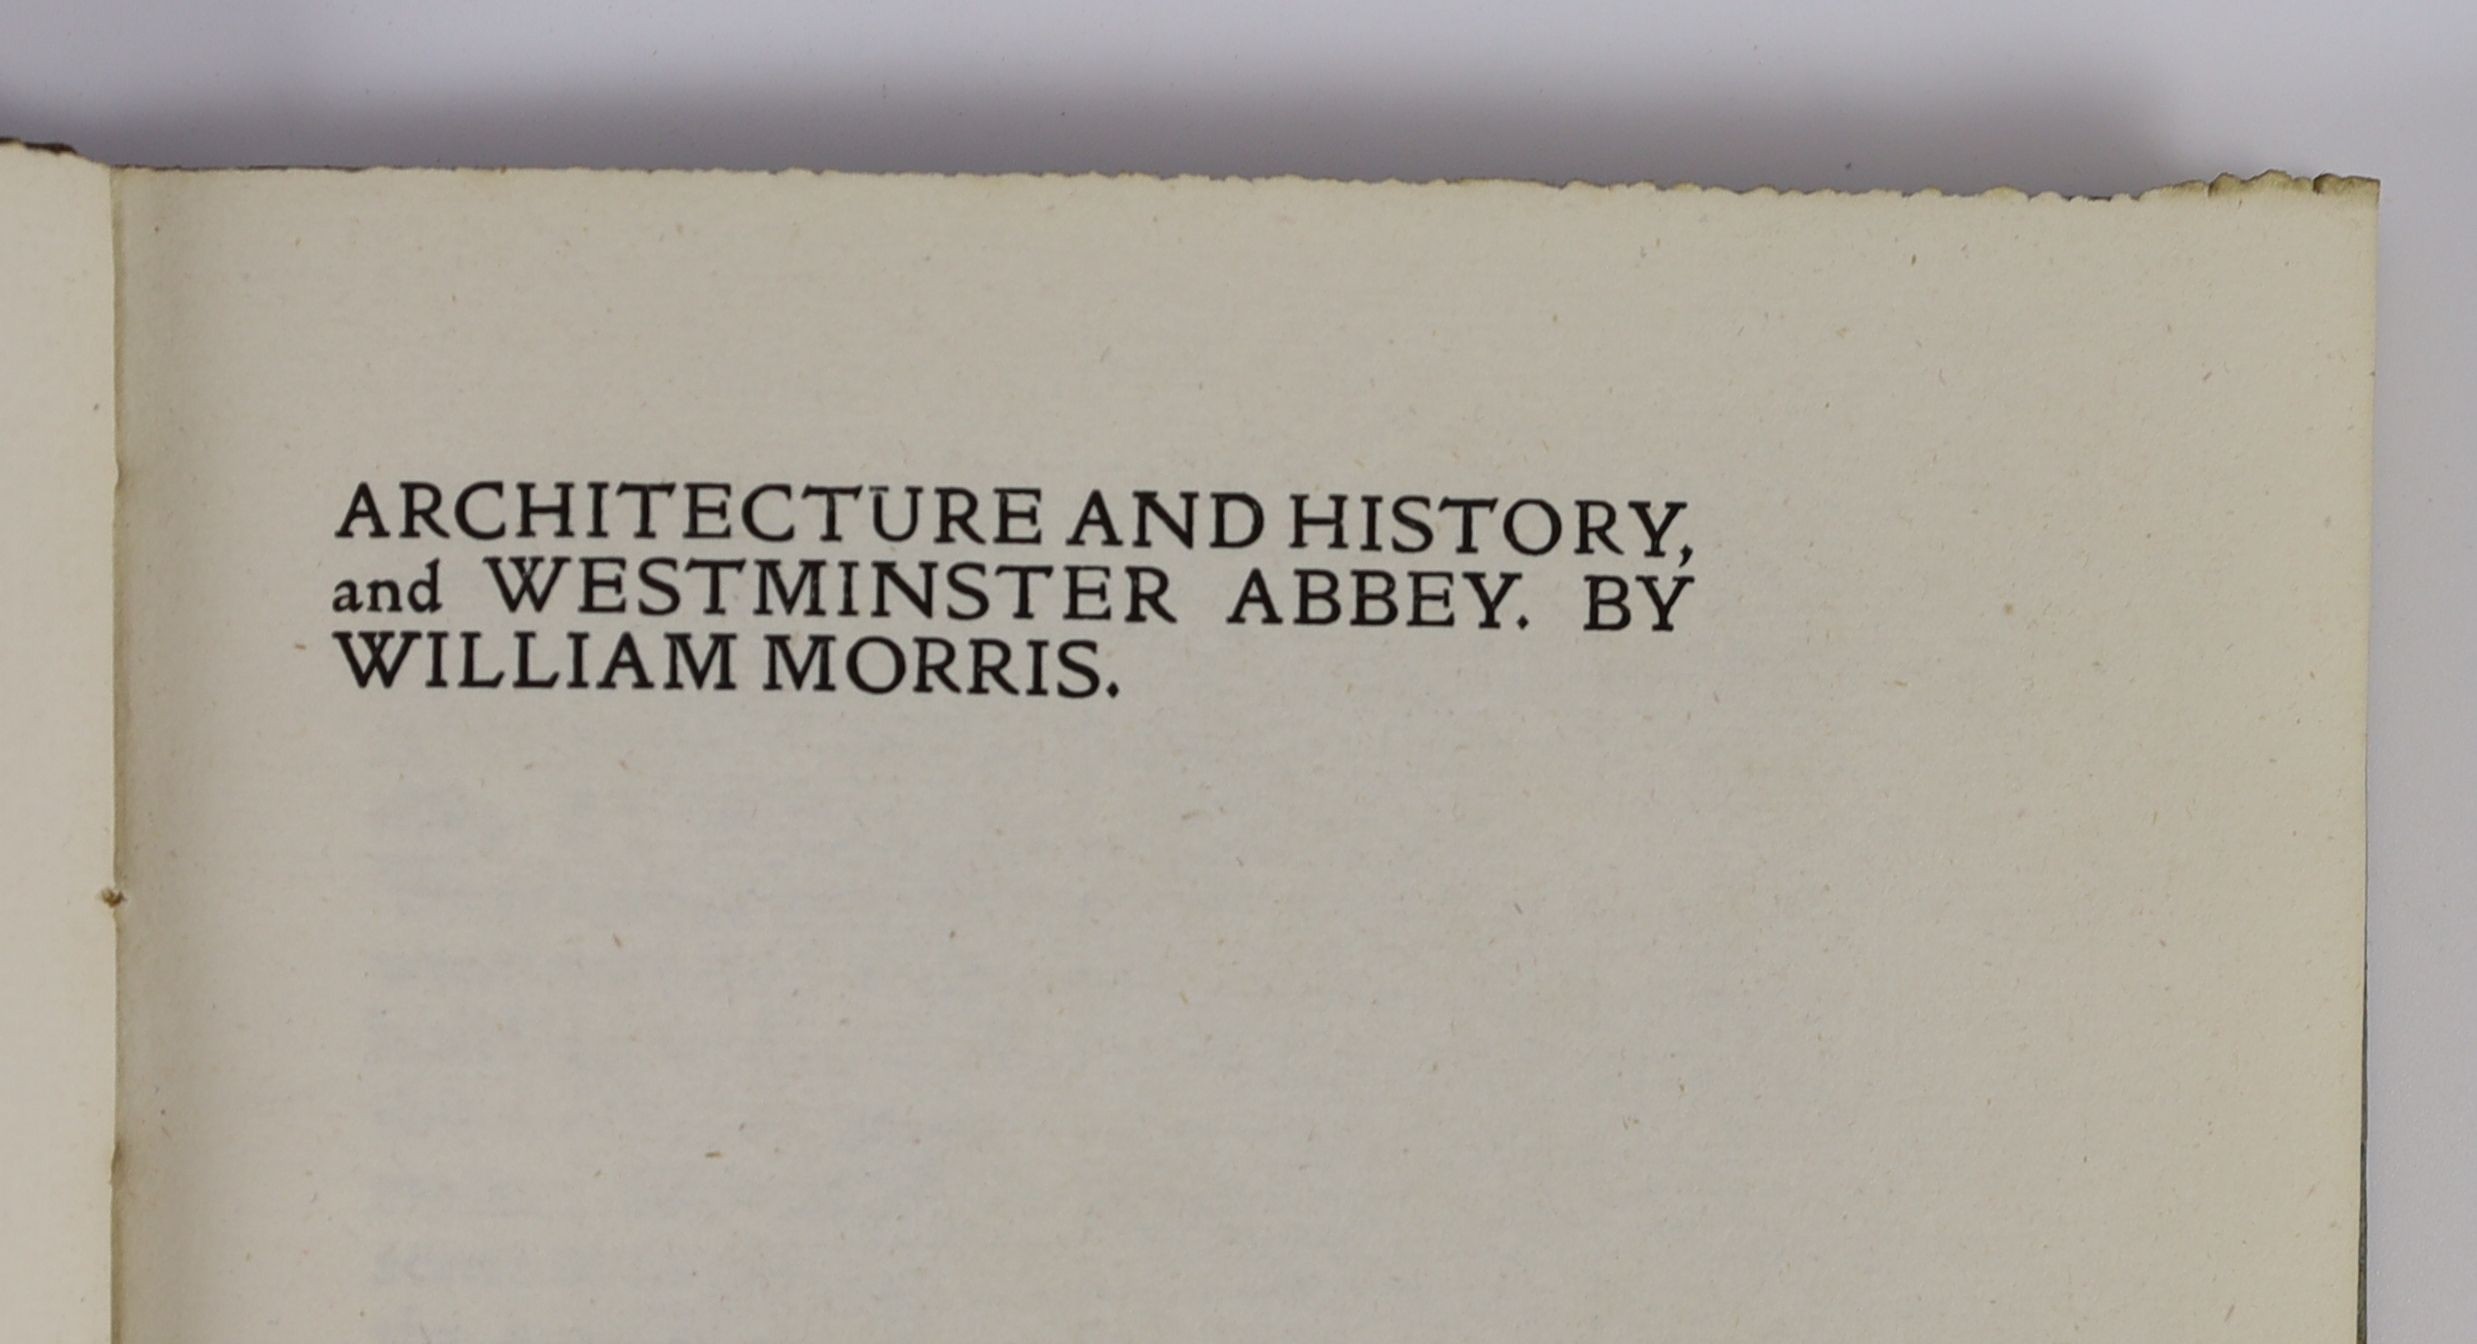 Morris, William - 3 works - Architecture and History, and Westminster Abbey, 8vo, original half cloth, hand-made paper, Longmans & Co., London, 1900; Art and it’s Producers, 8vo, original half cloth, hand-made paper, Lon